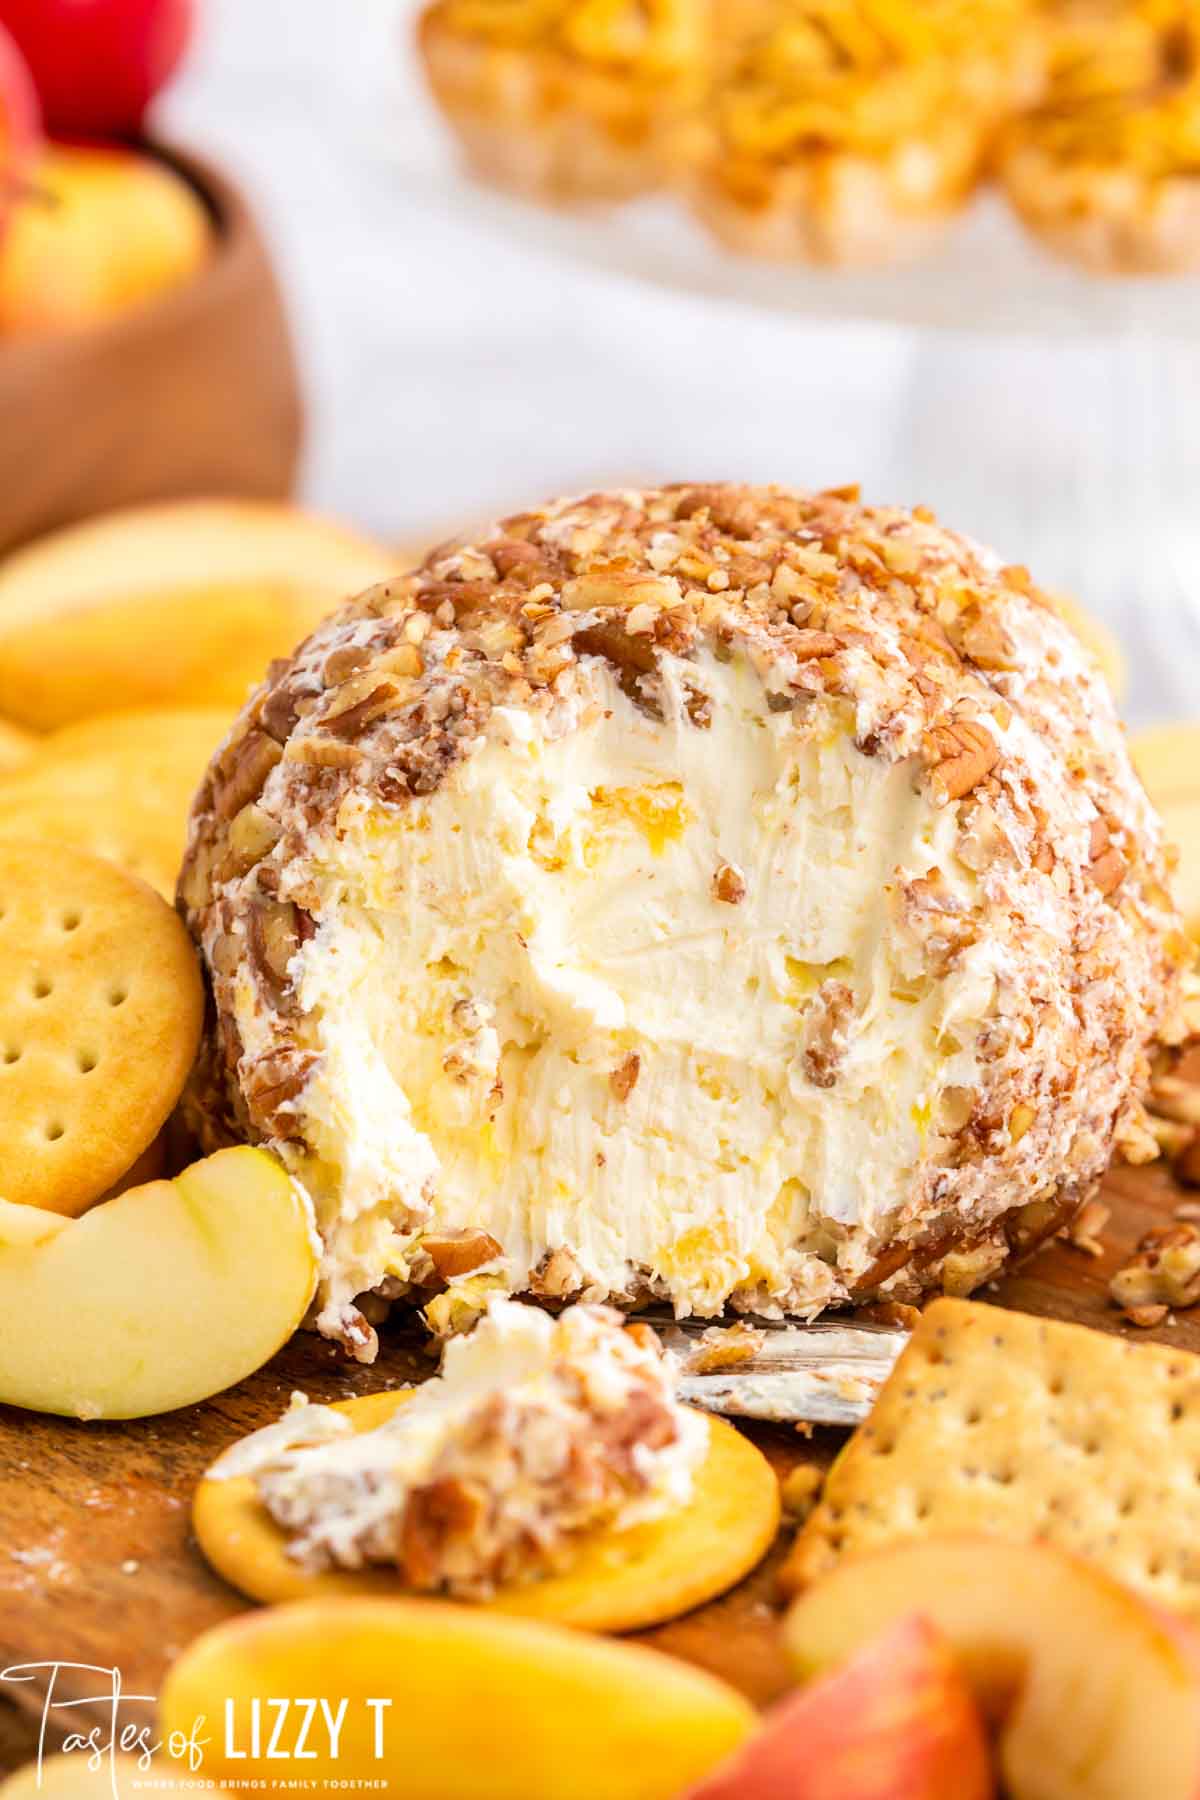 Pineapple Cheese Ball Recipe Southern Living - Find Vegetarian Recipes